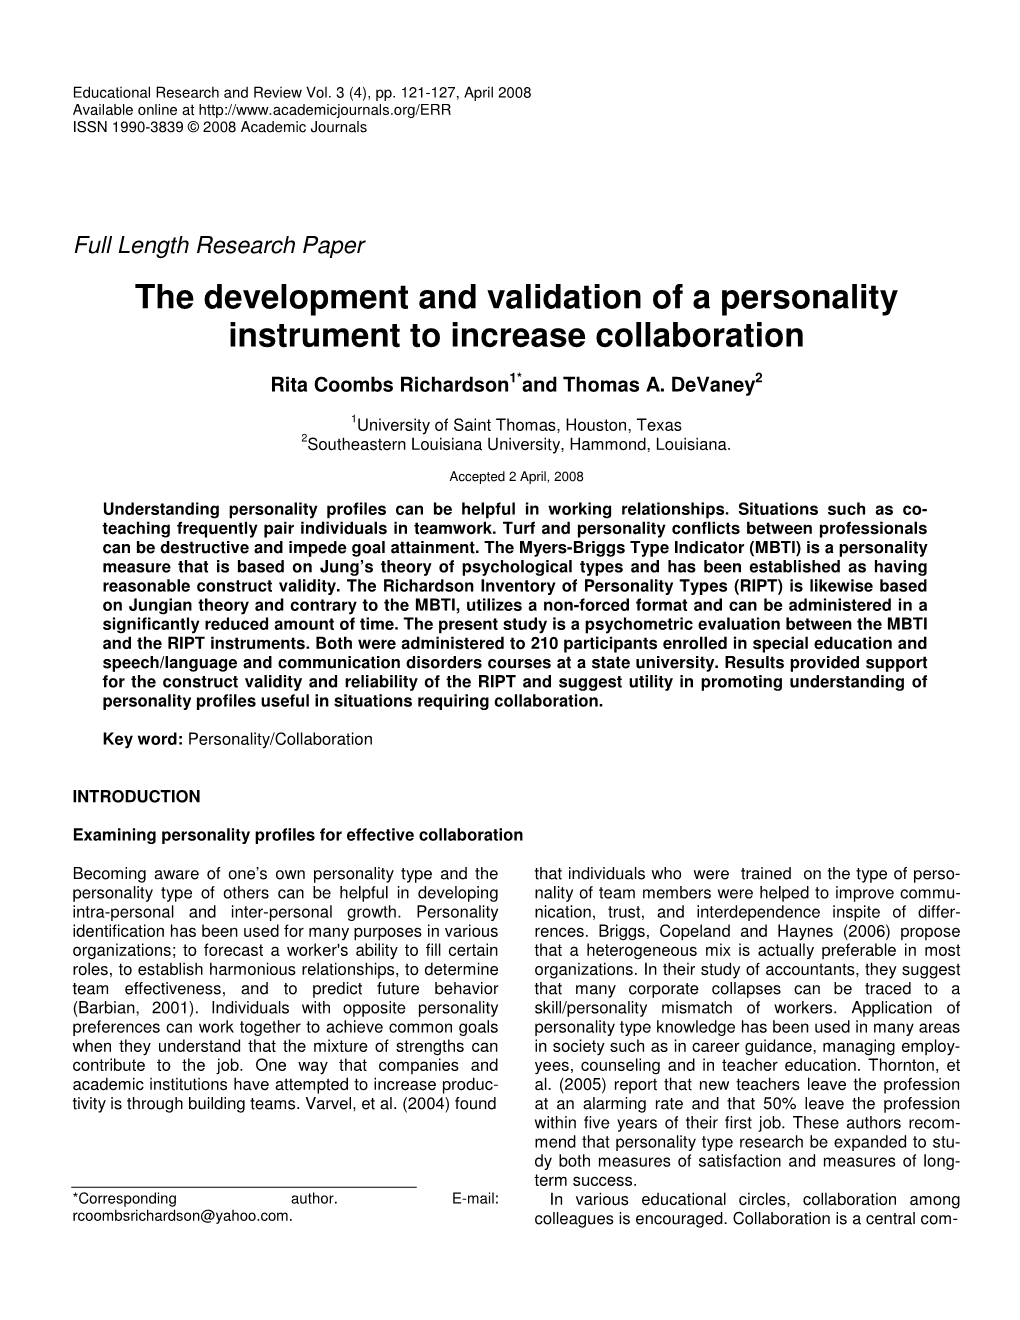 The Development and Validation of a Personality Instrument to Increase Collaboration